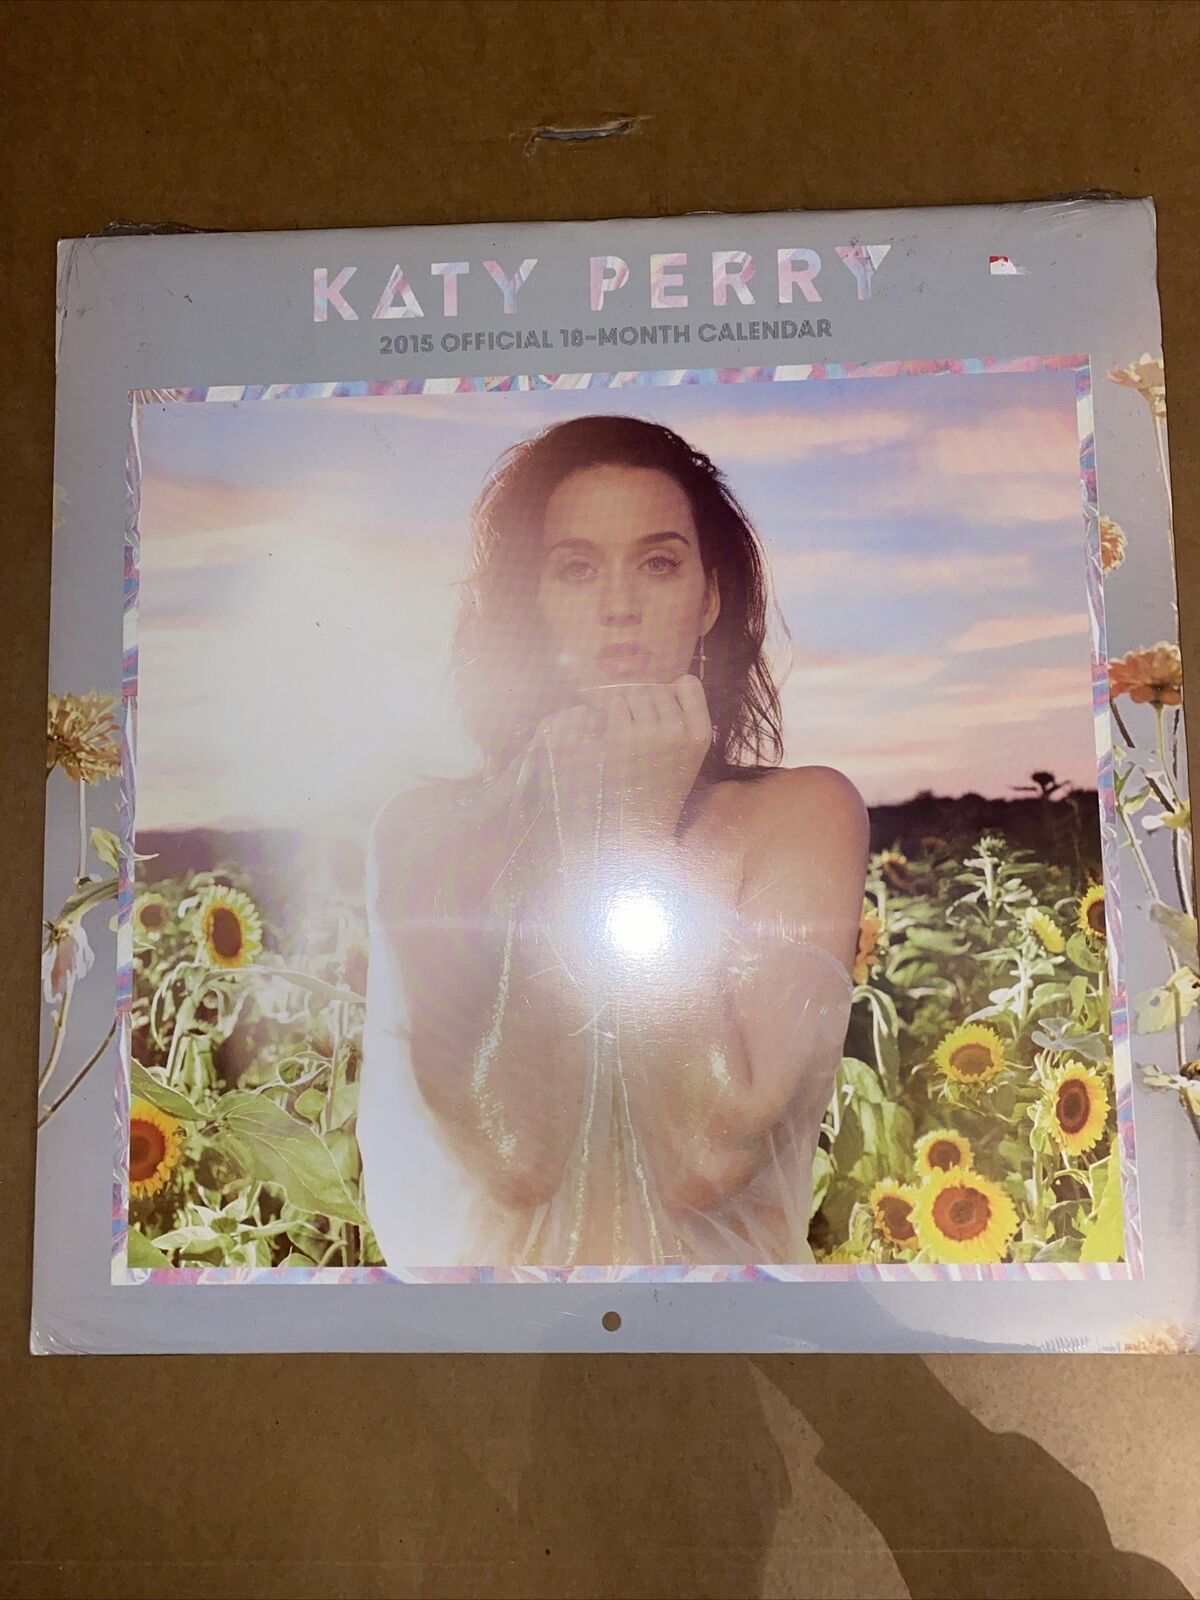 Katy Perry 2015 Official 18-month Calendar NEW SEALED COLLECTIBLE 